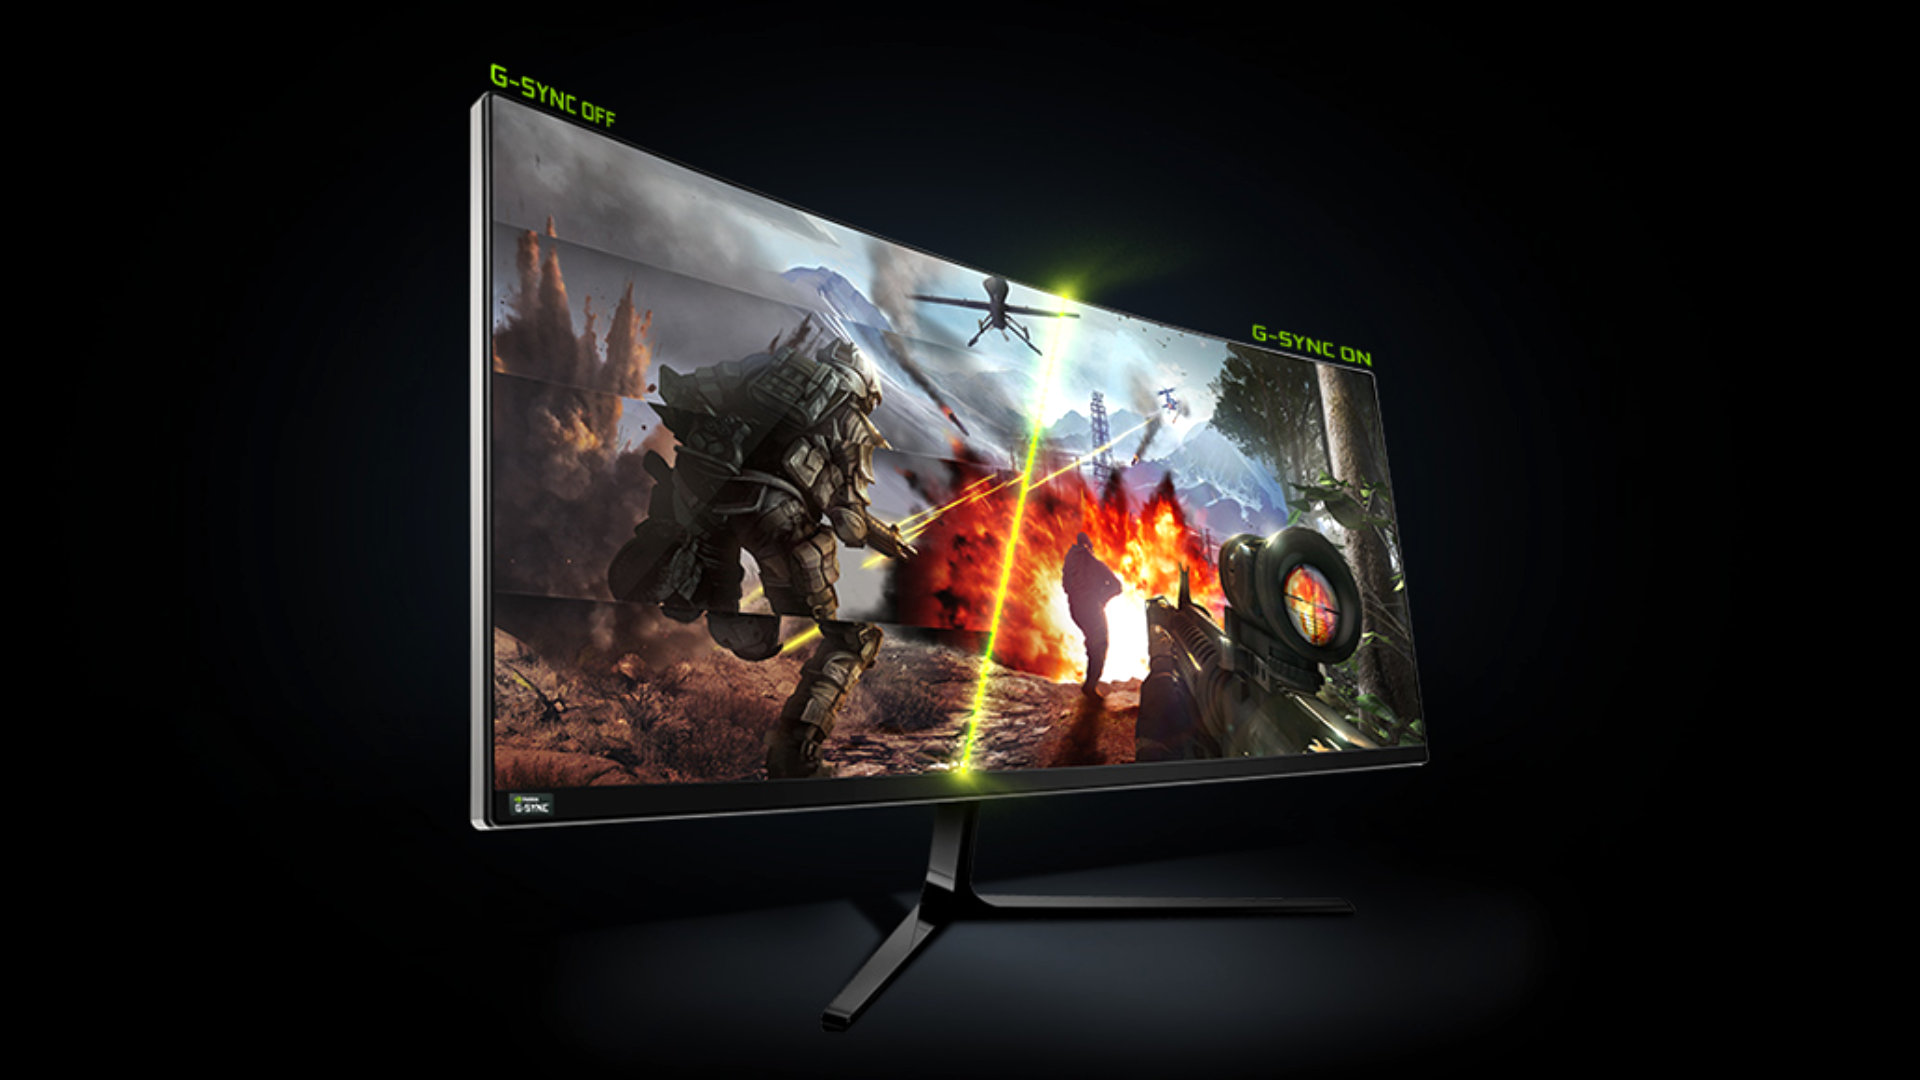 Overgave Perforatie omhelzing What is FreeSync? – How to use AMD's tech with an Nvidia GPU | PCGamesN